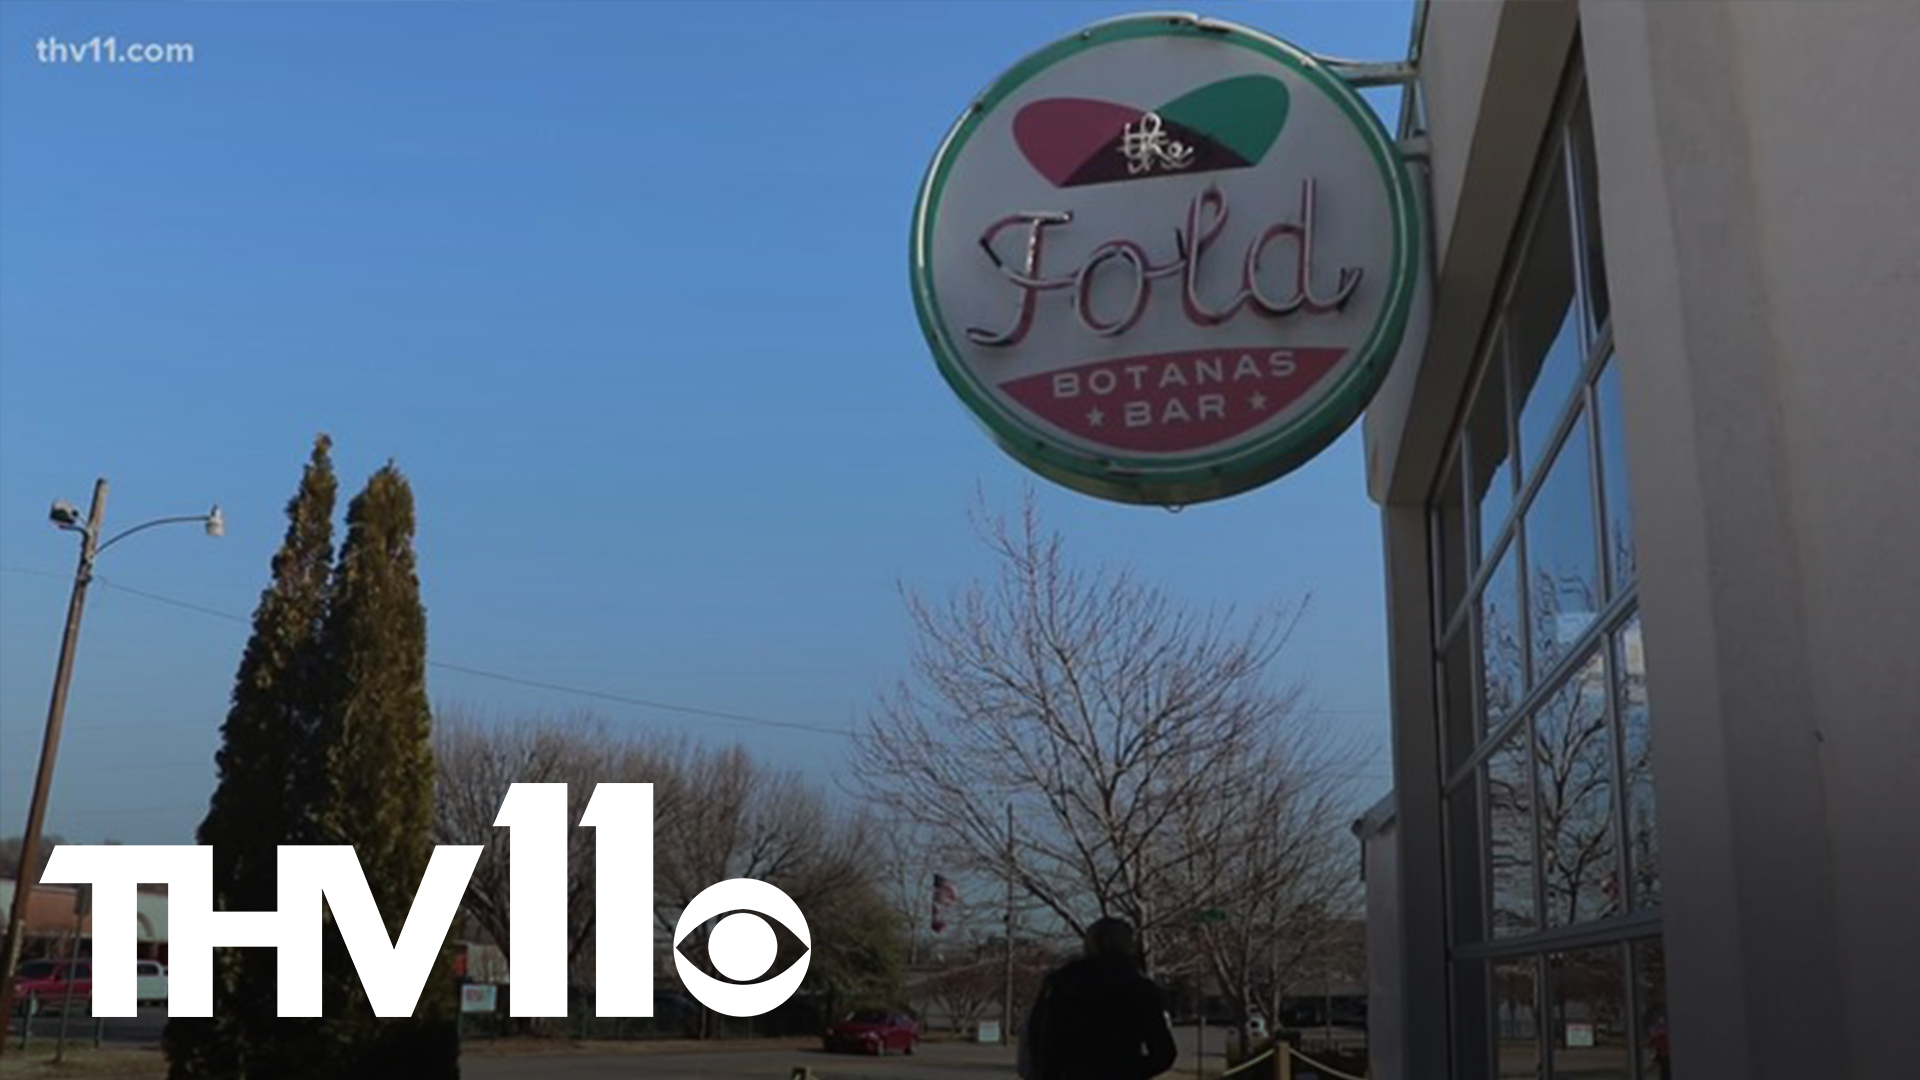 The Fold in Little Rock has split their staff into two groups. Each 'pod' of employees is only working with one another and never interacts with the other staff.